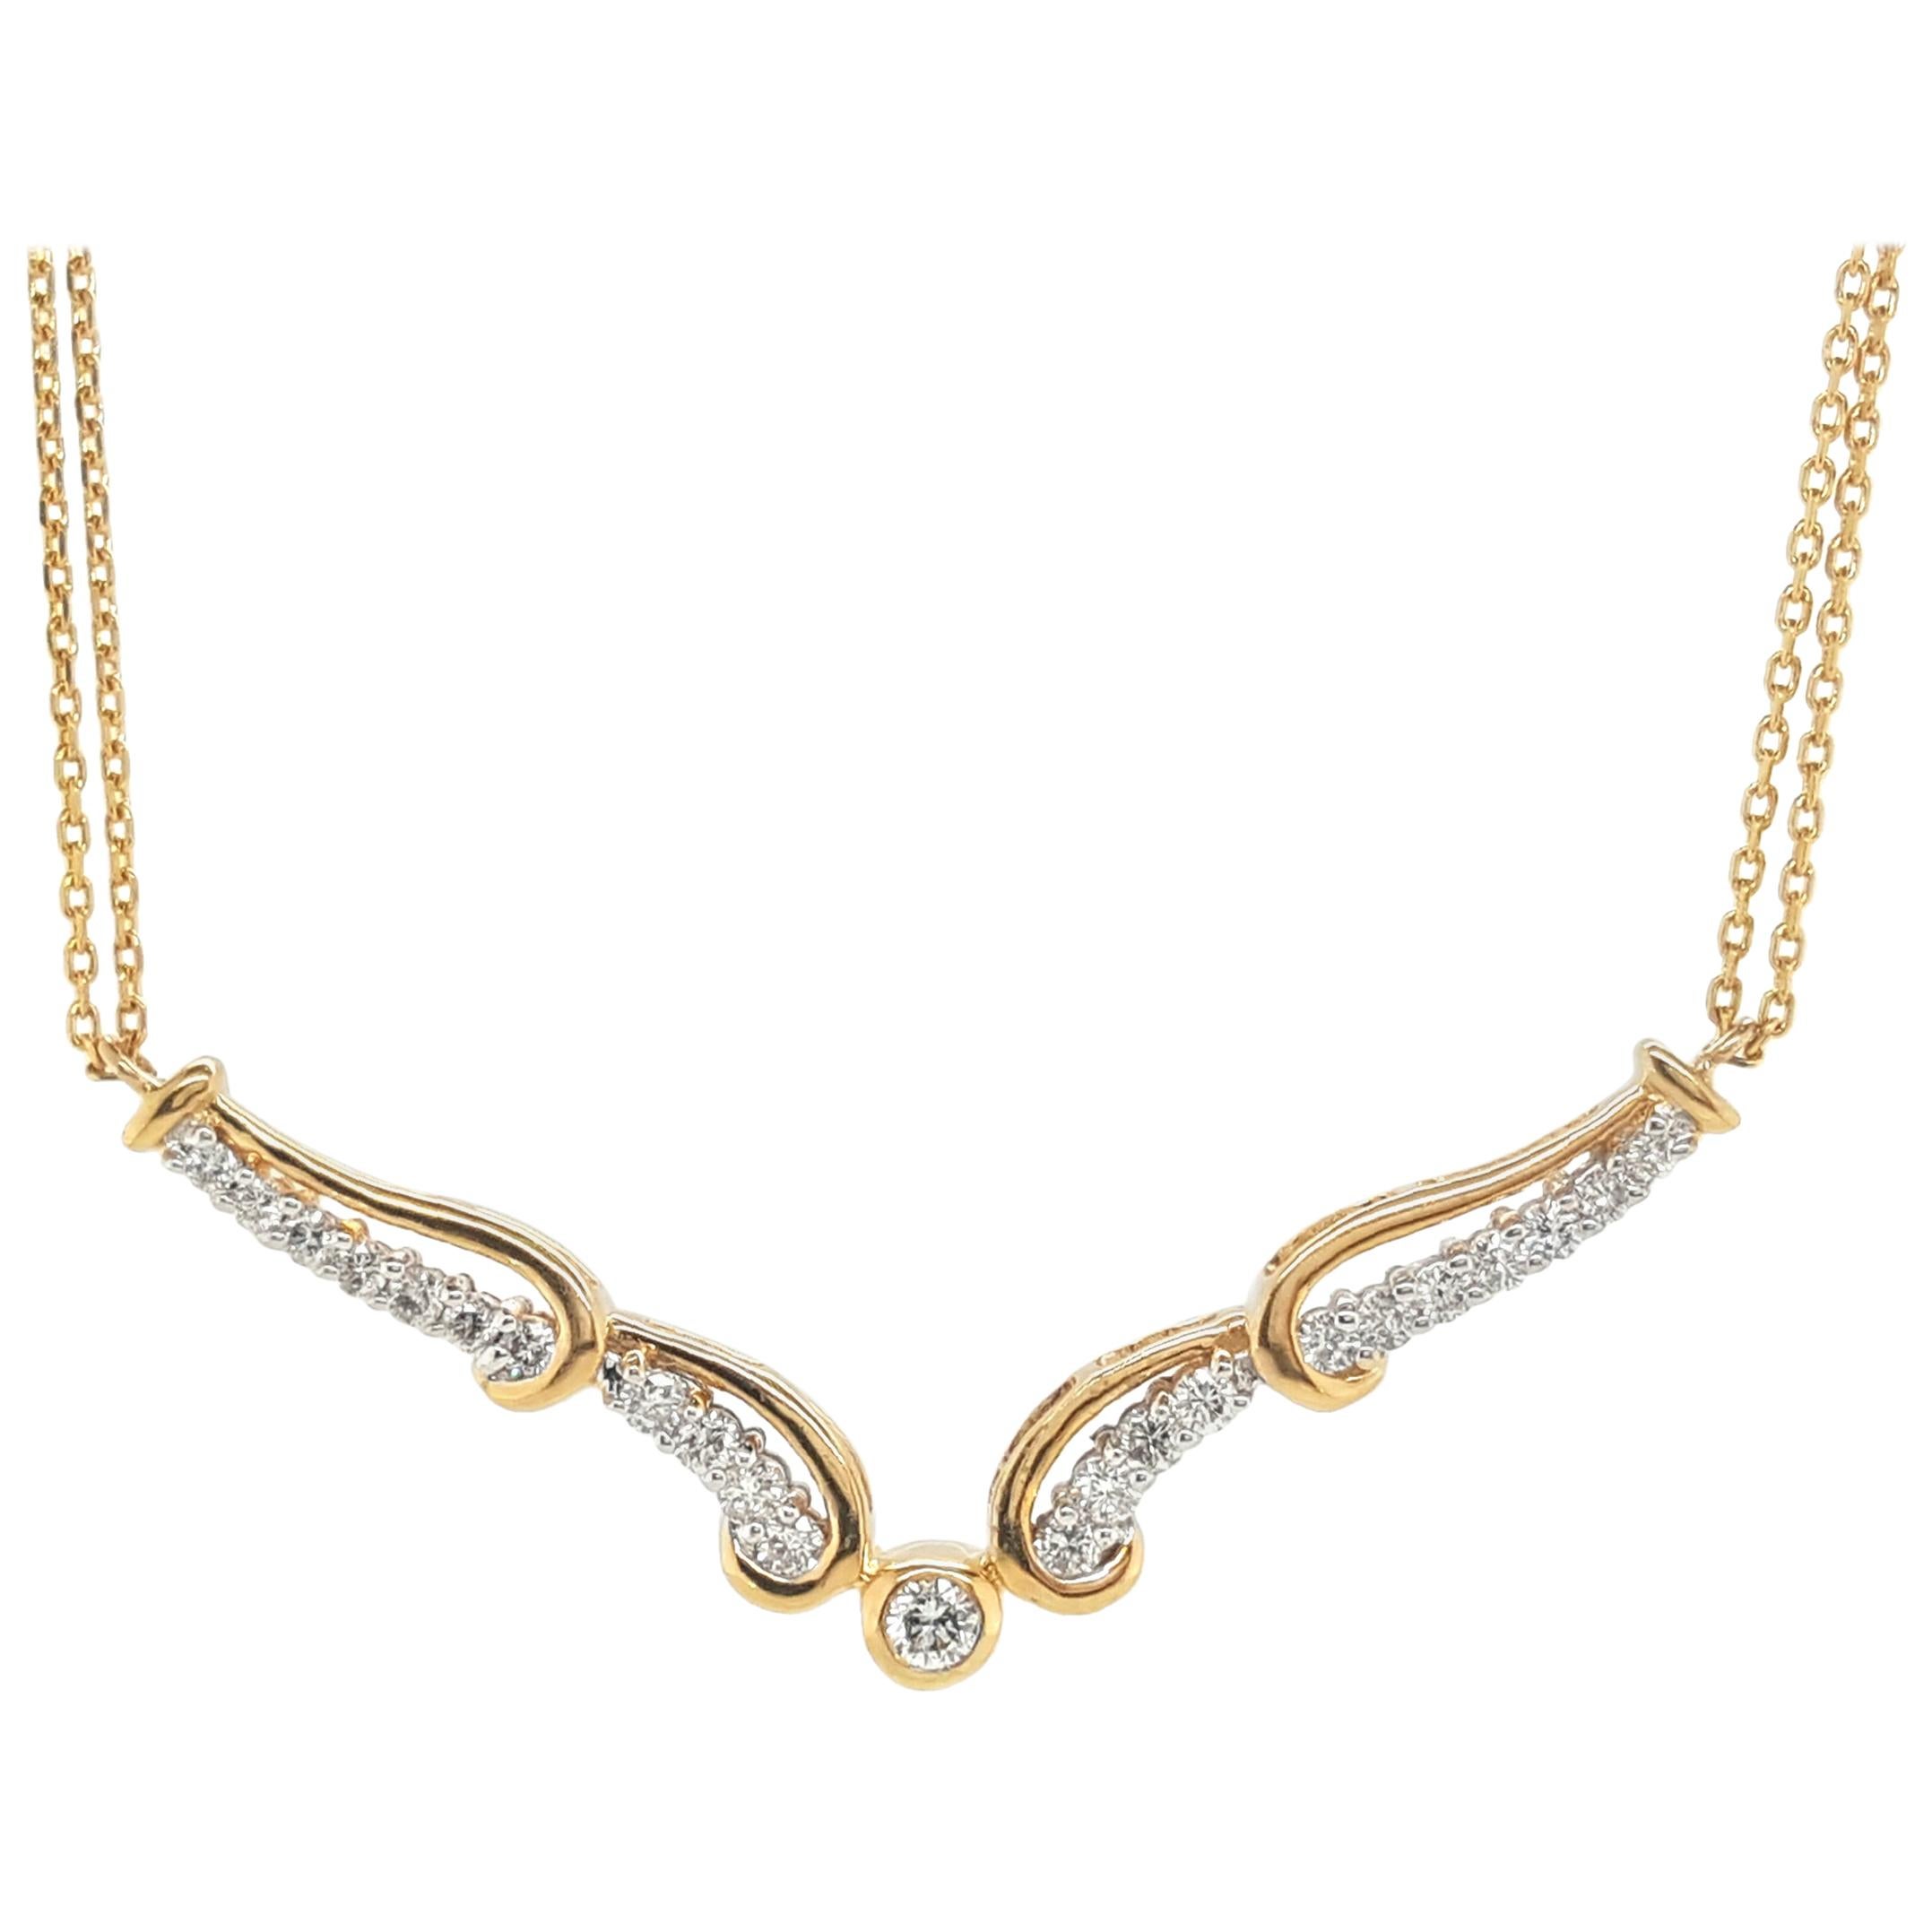 18 Karat Yellow Gold Diamond Necklace with Double Chain